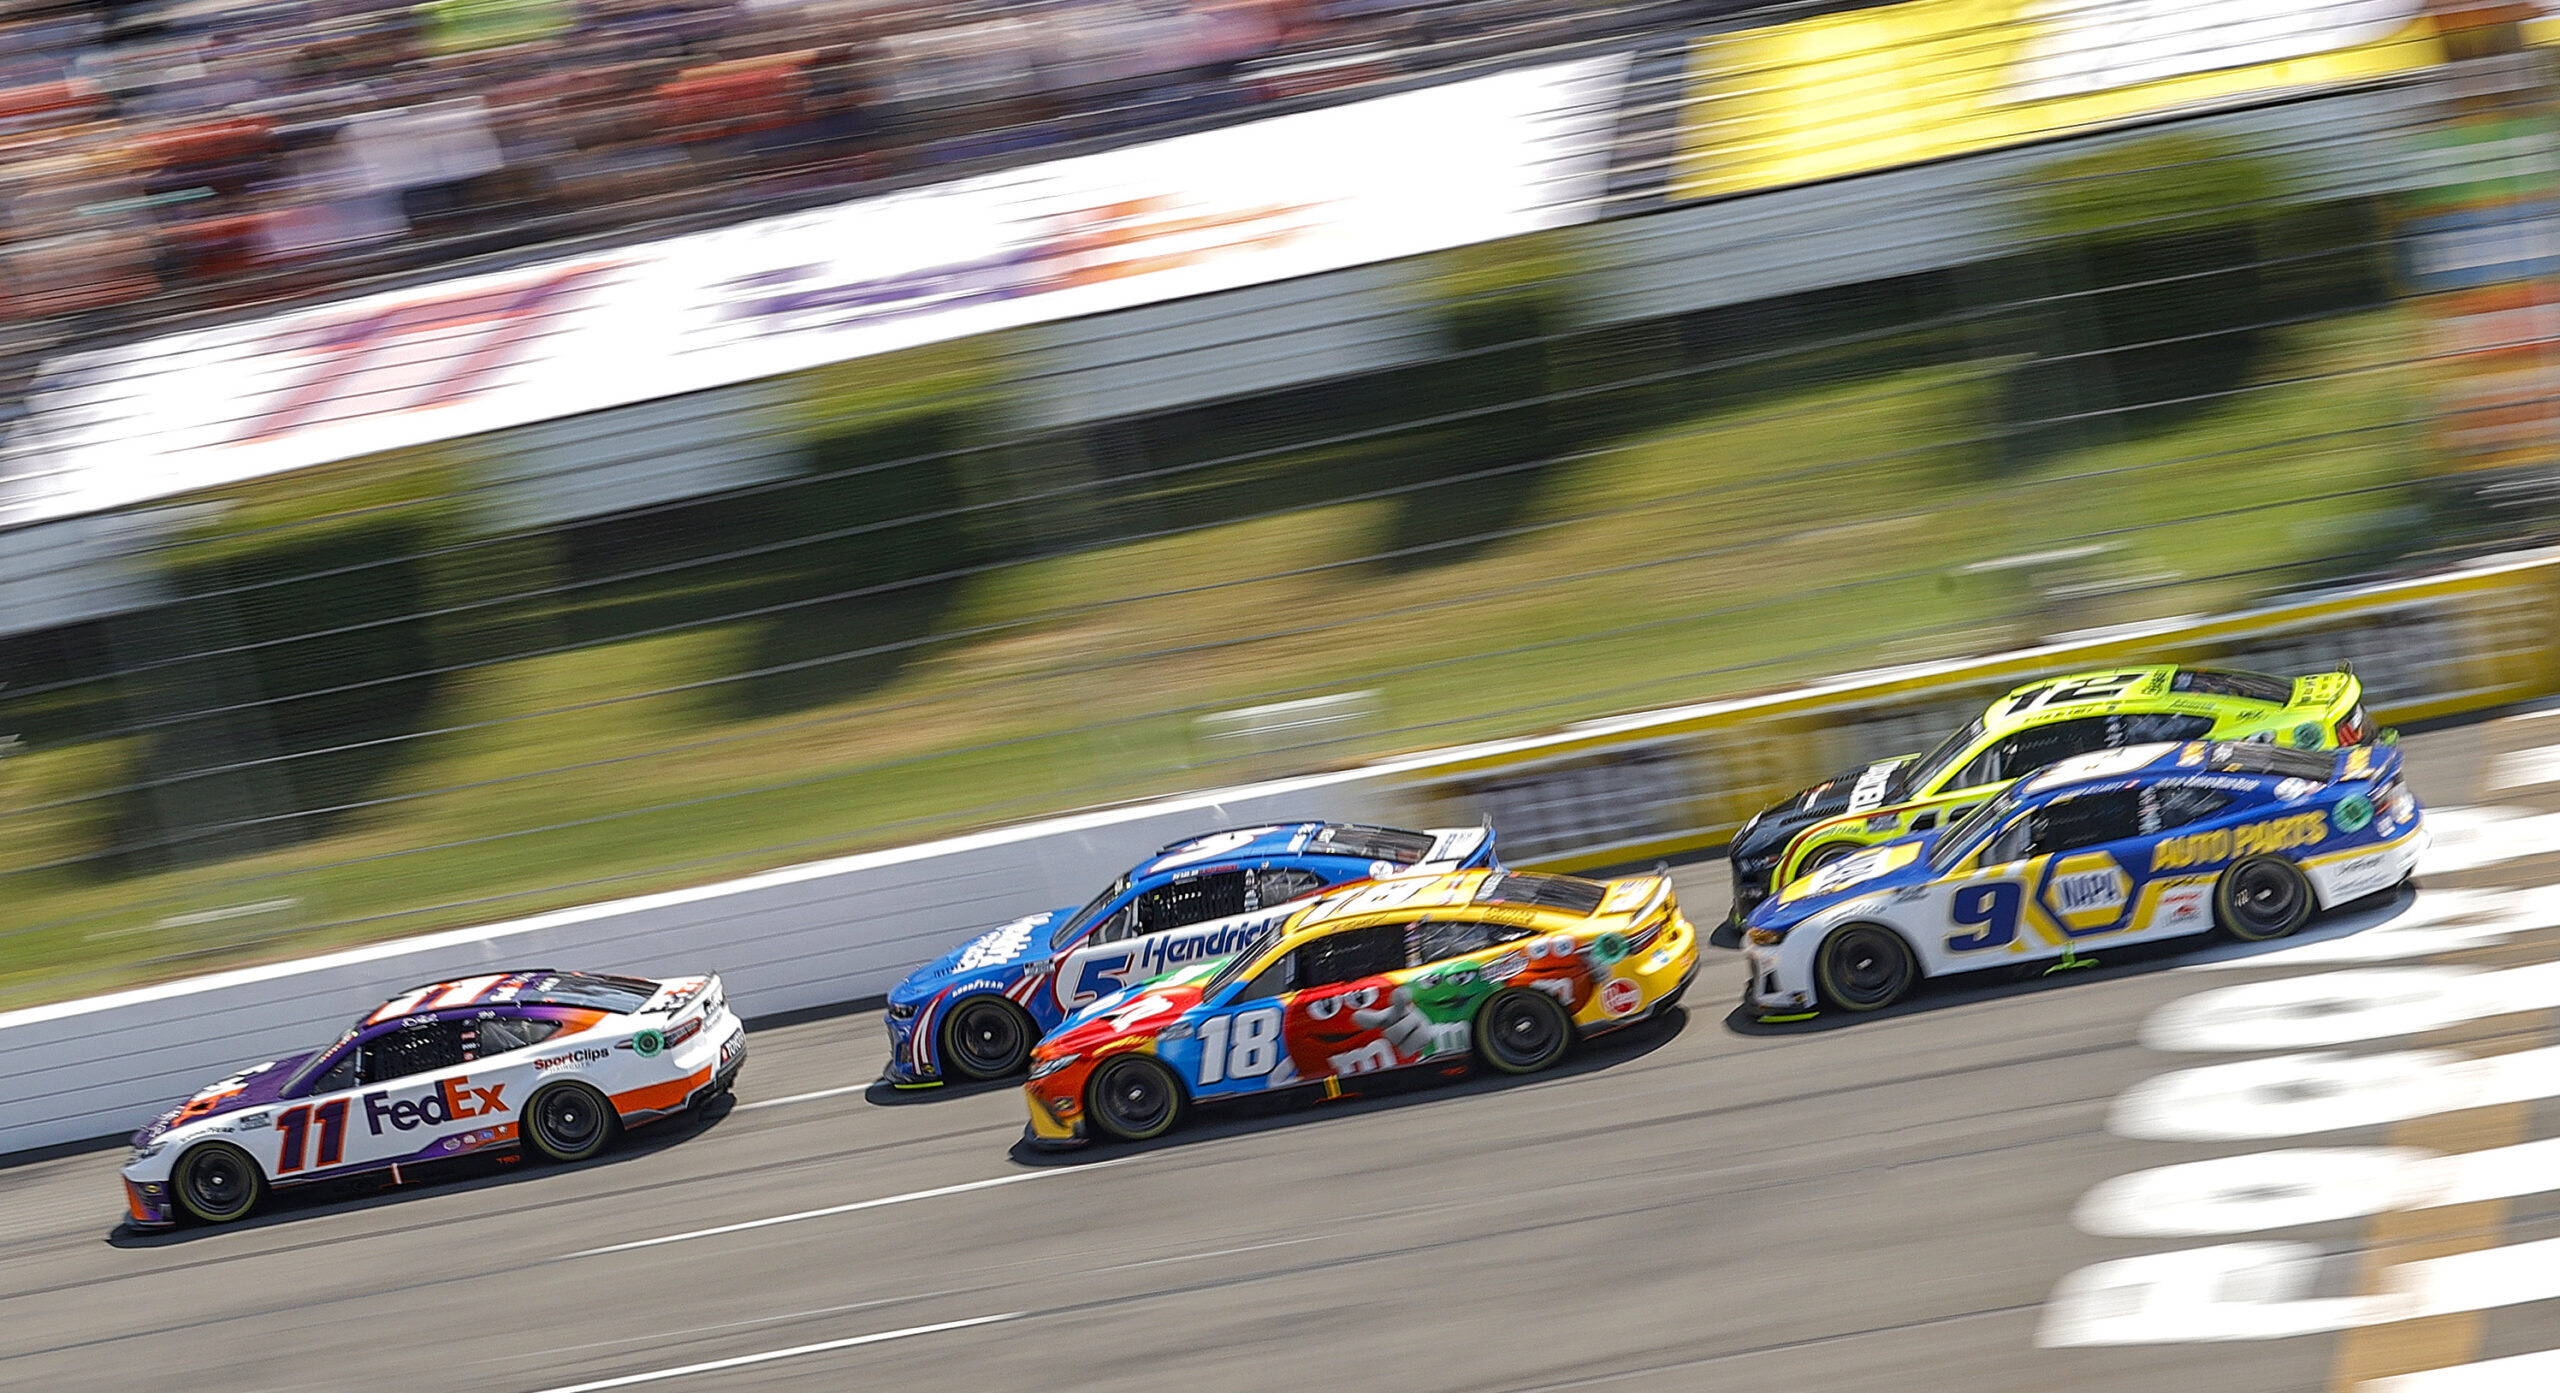 NASCAR Travels to Pocono Raceway for an Exciting Full Schedule of